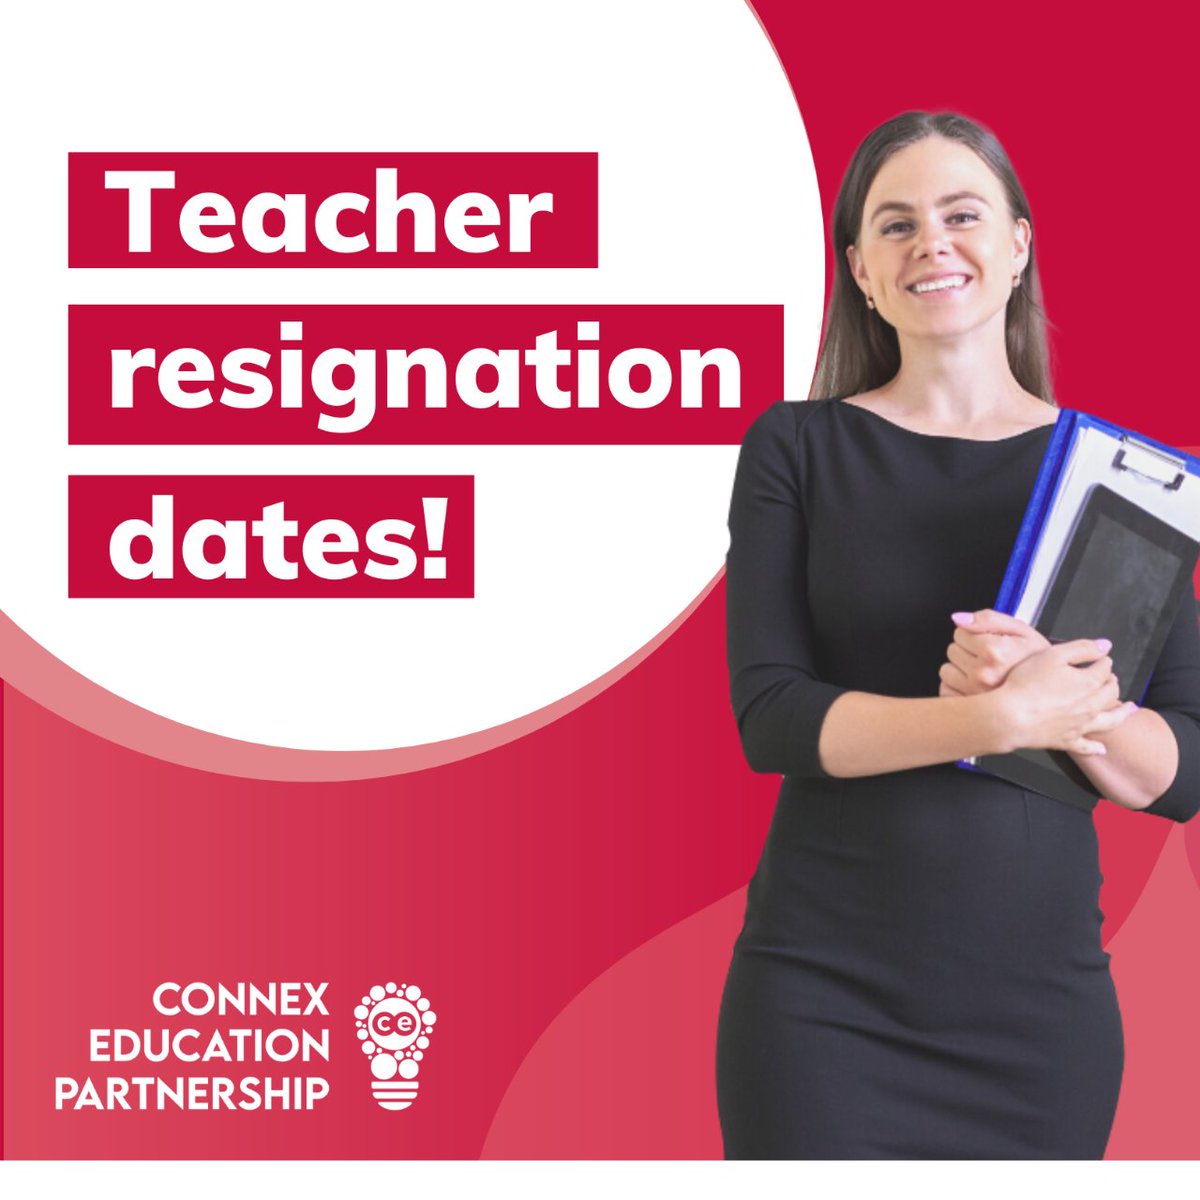 Teacher Resignation Dates May 31st, explore new teaching opportunities with #ConnexEducation 🍎

Click the link to find all our current teacher vacancies available 👉 shorturl.at/axVX7

#TeachingOpportunities #CareerGrowth #ResignationDates #NewRole